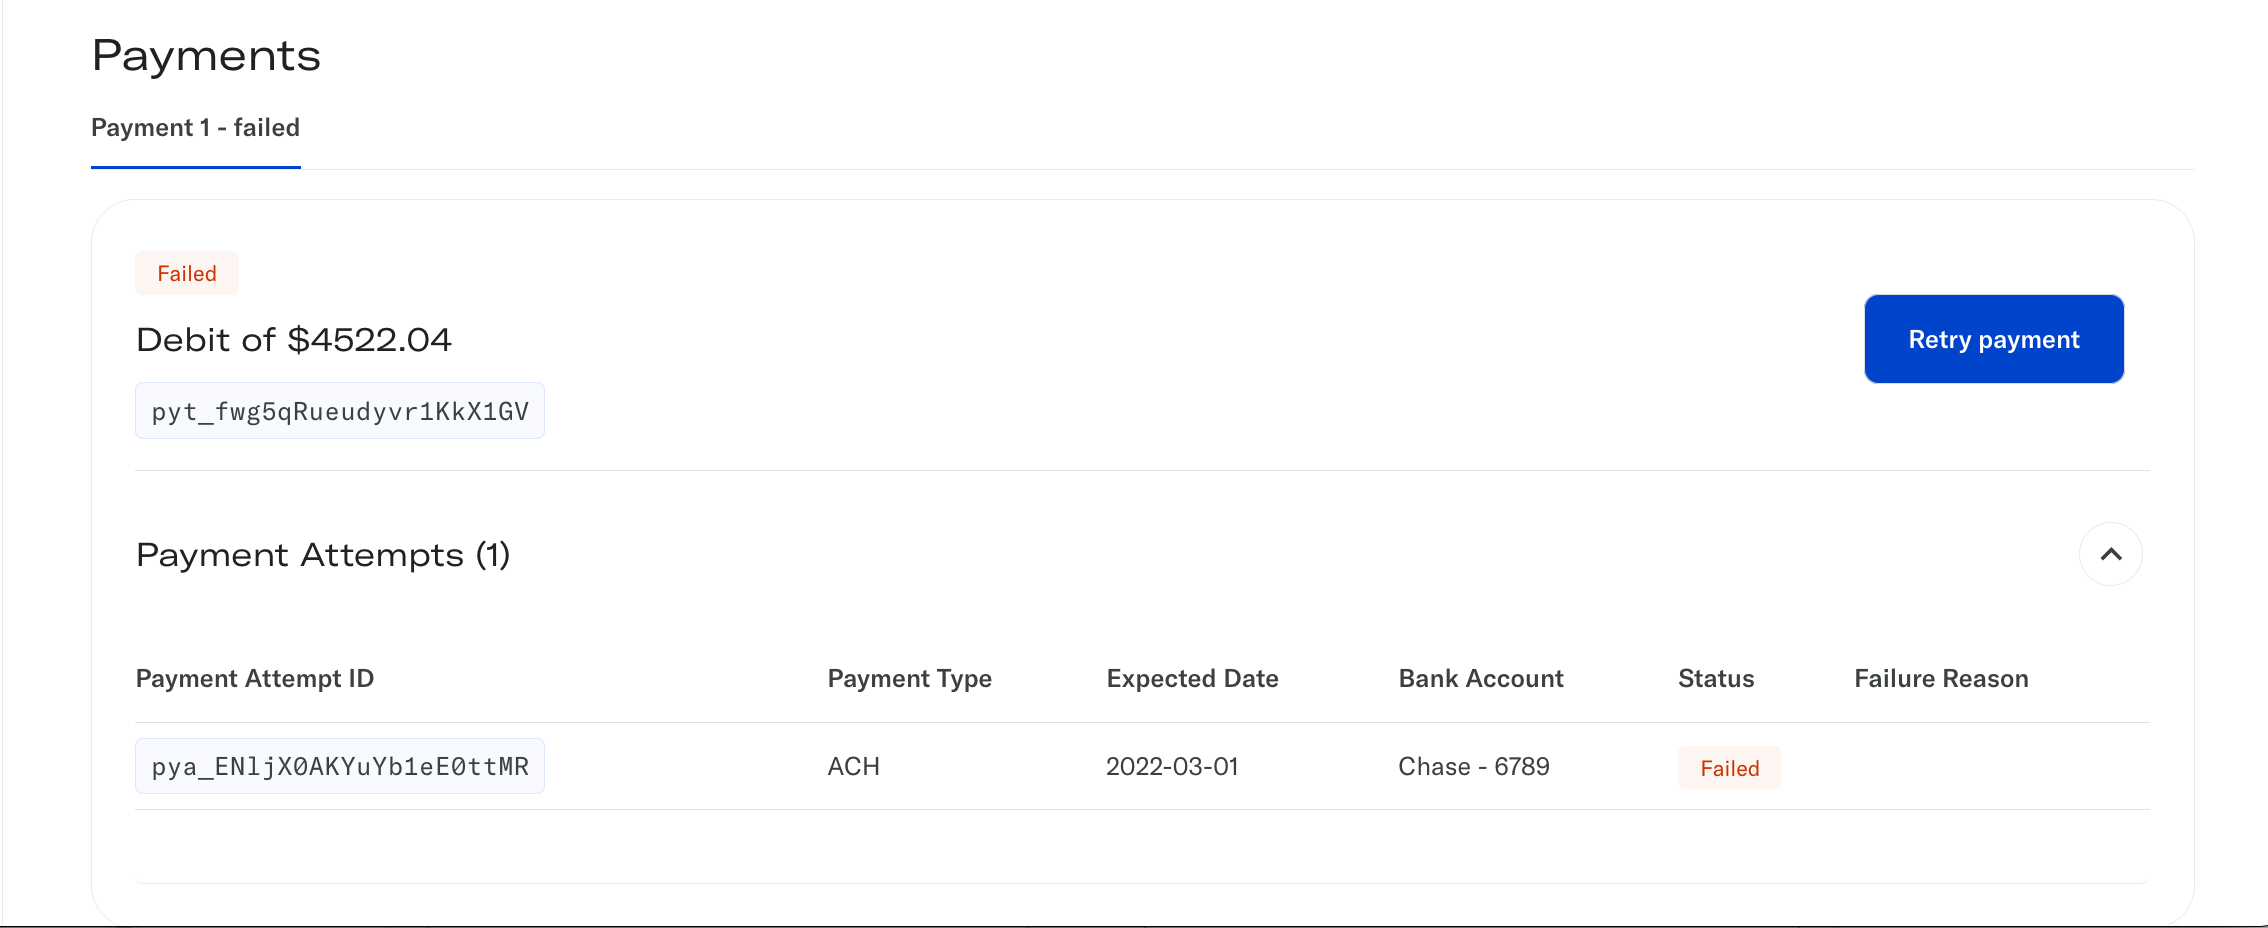 Console view of a failed Payment with the Retry button enabled